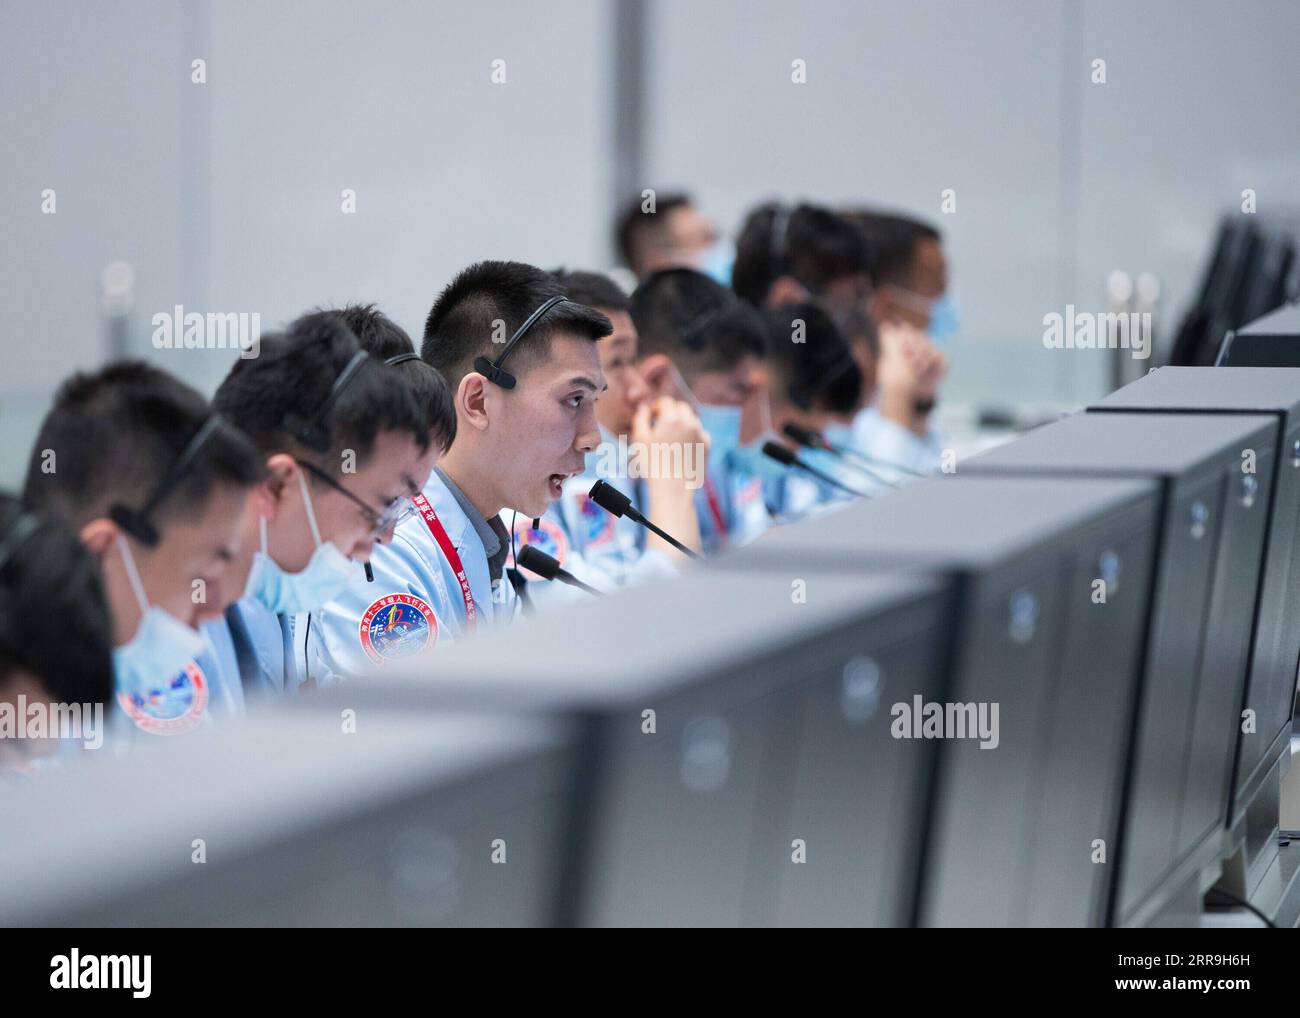 210617 -- BEIJING, June 17, 2021 -- Technical personnel monitor China s Shenzhou-12 manned spaceship docking with the space station core module Tianhe at Beijing Aerospace Control Center in Beijing, capital of China, June 17, 2021. China s Shenzhou-12 manned spaceship has successfully docked with the space station core module Tianhe on Thursday, according to the China Manned Space Agency CMSA. The spaceship, launched on Thursday morning, completed orbital status setting after entering the orbit and conducted a fast autonomous rendezvous and docking with the front docking port of Tianhe at 3:54 Stock Photo